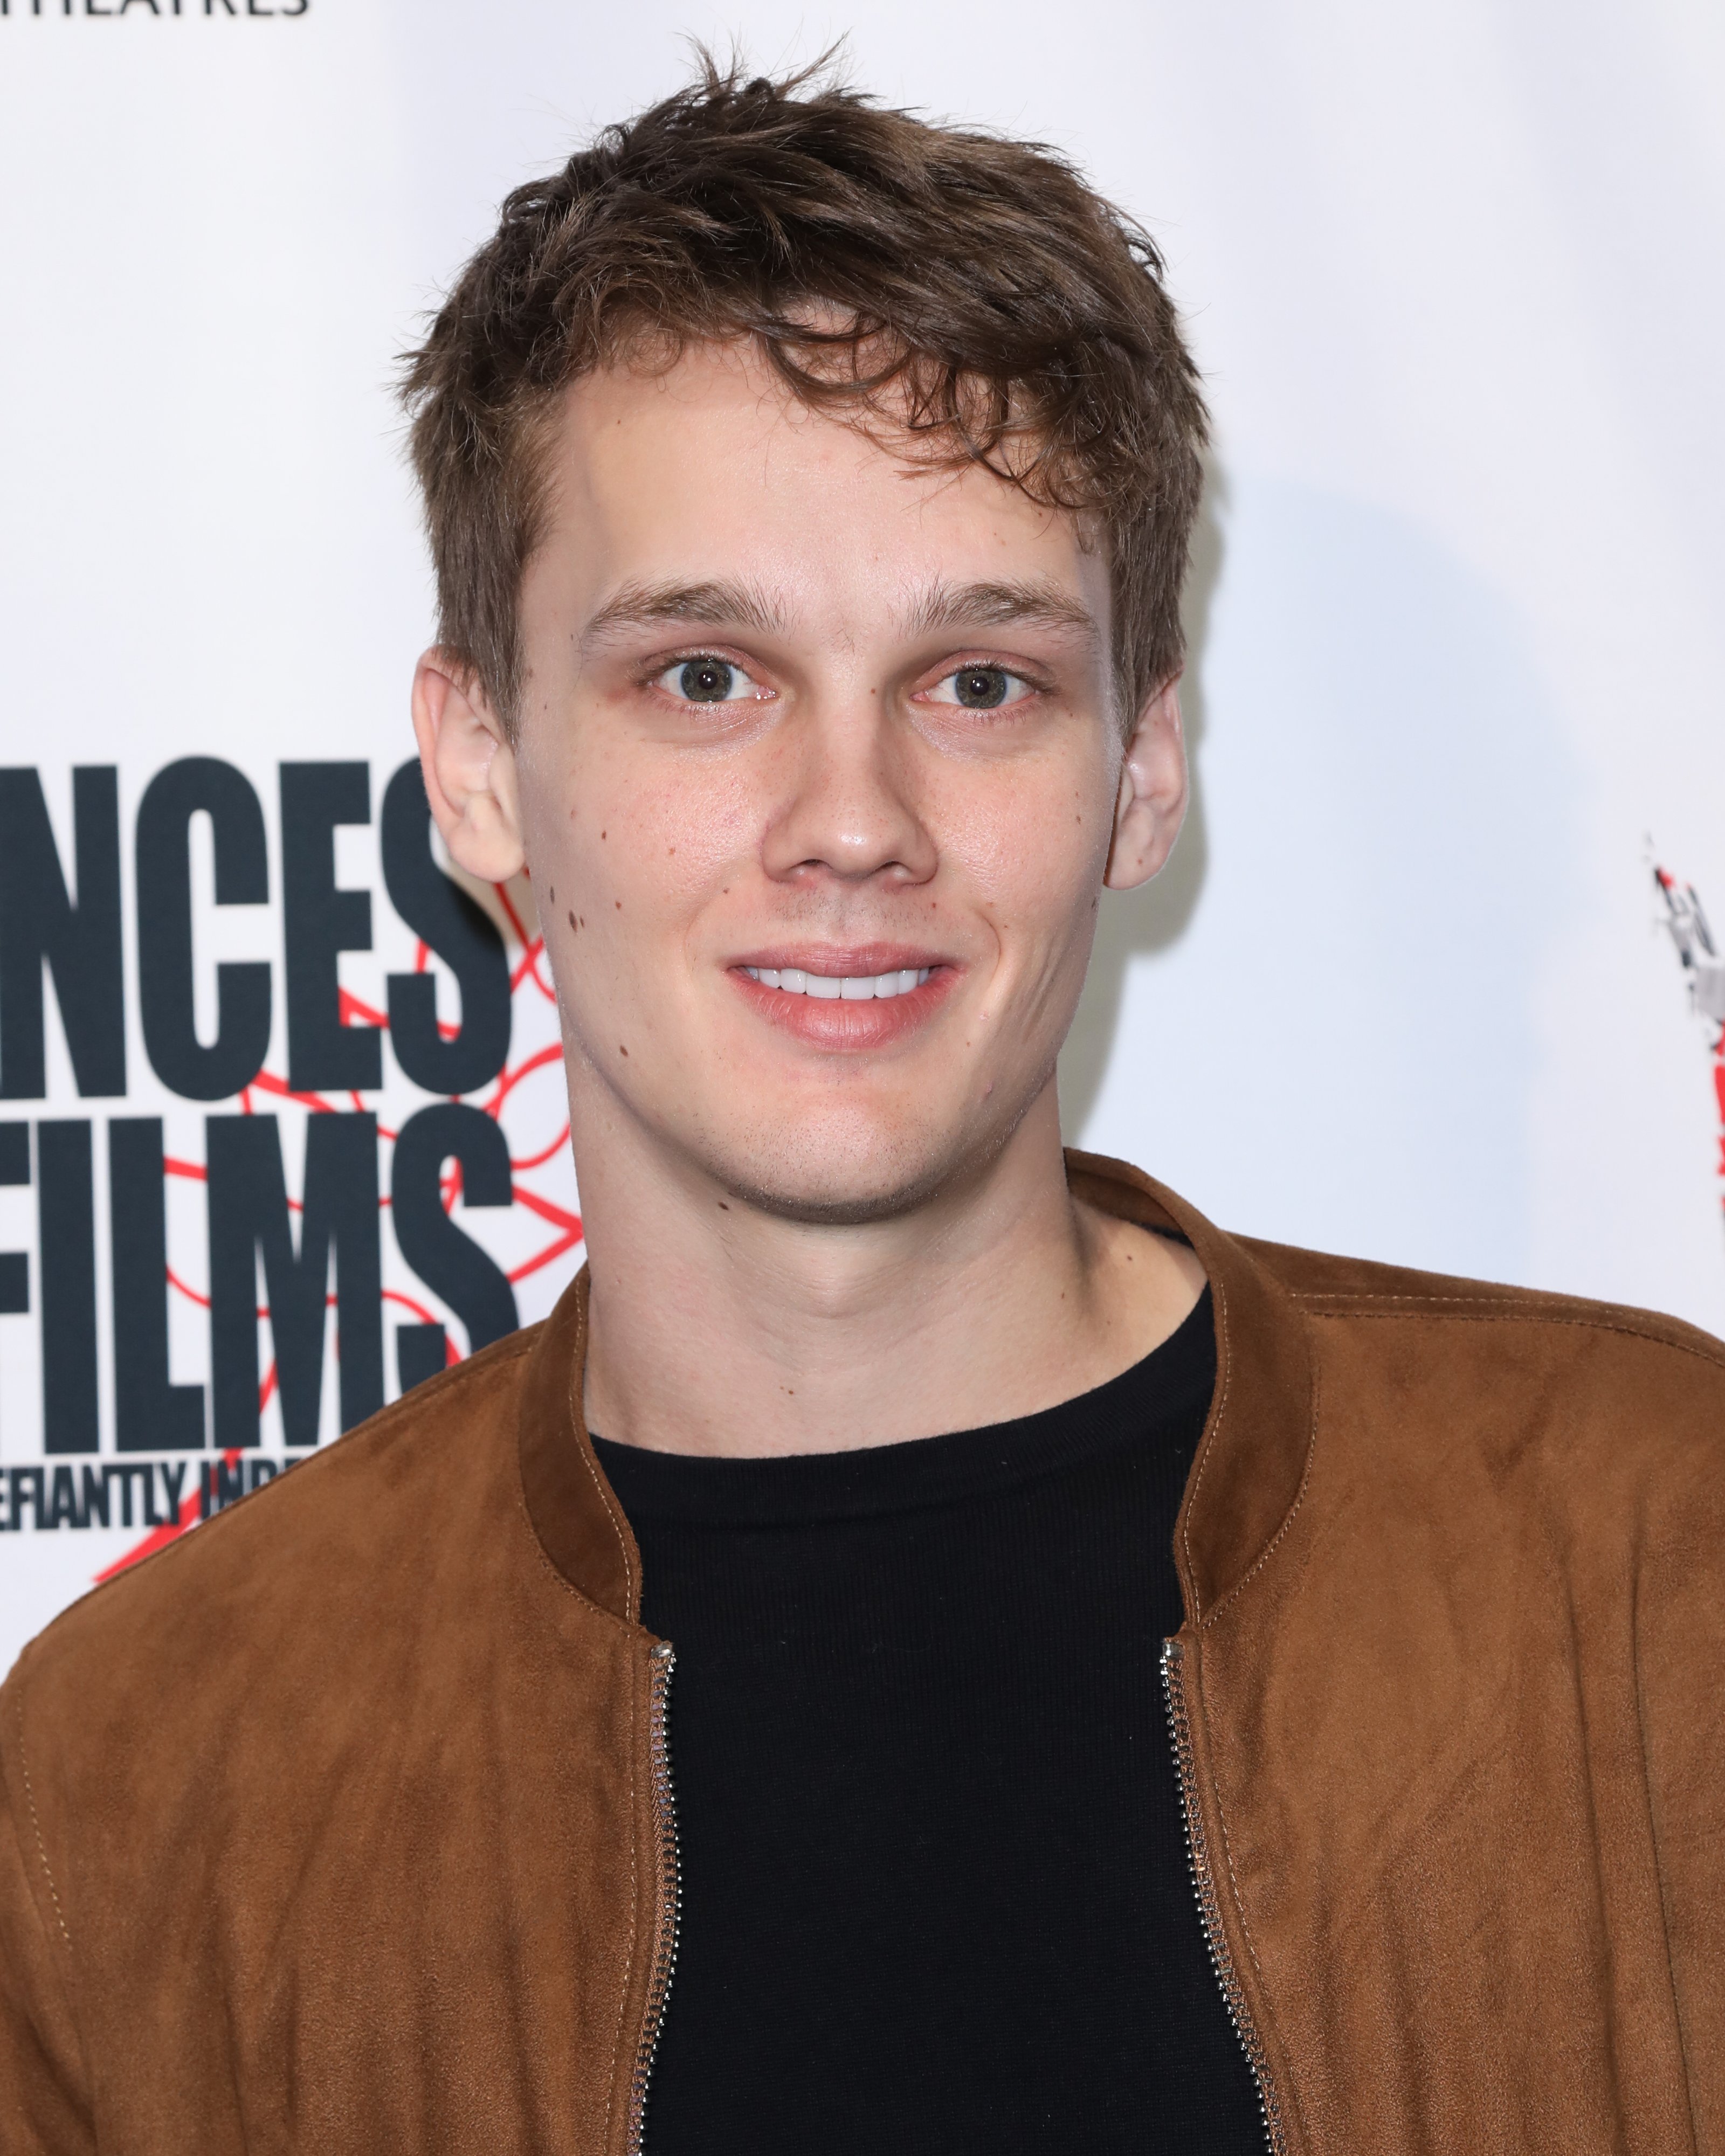 Hunter Doohan attends the "Where We Disappear" film premiere at the 2019 Dances With Films Festival at TCL Chinese Theatre IMAX on June 21, 2019, in Hollywood, California. | Source: Getty Images